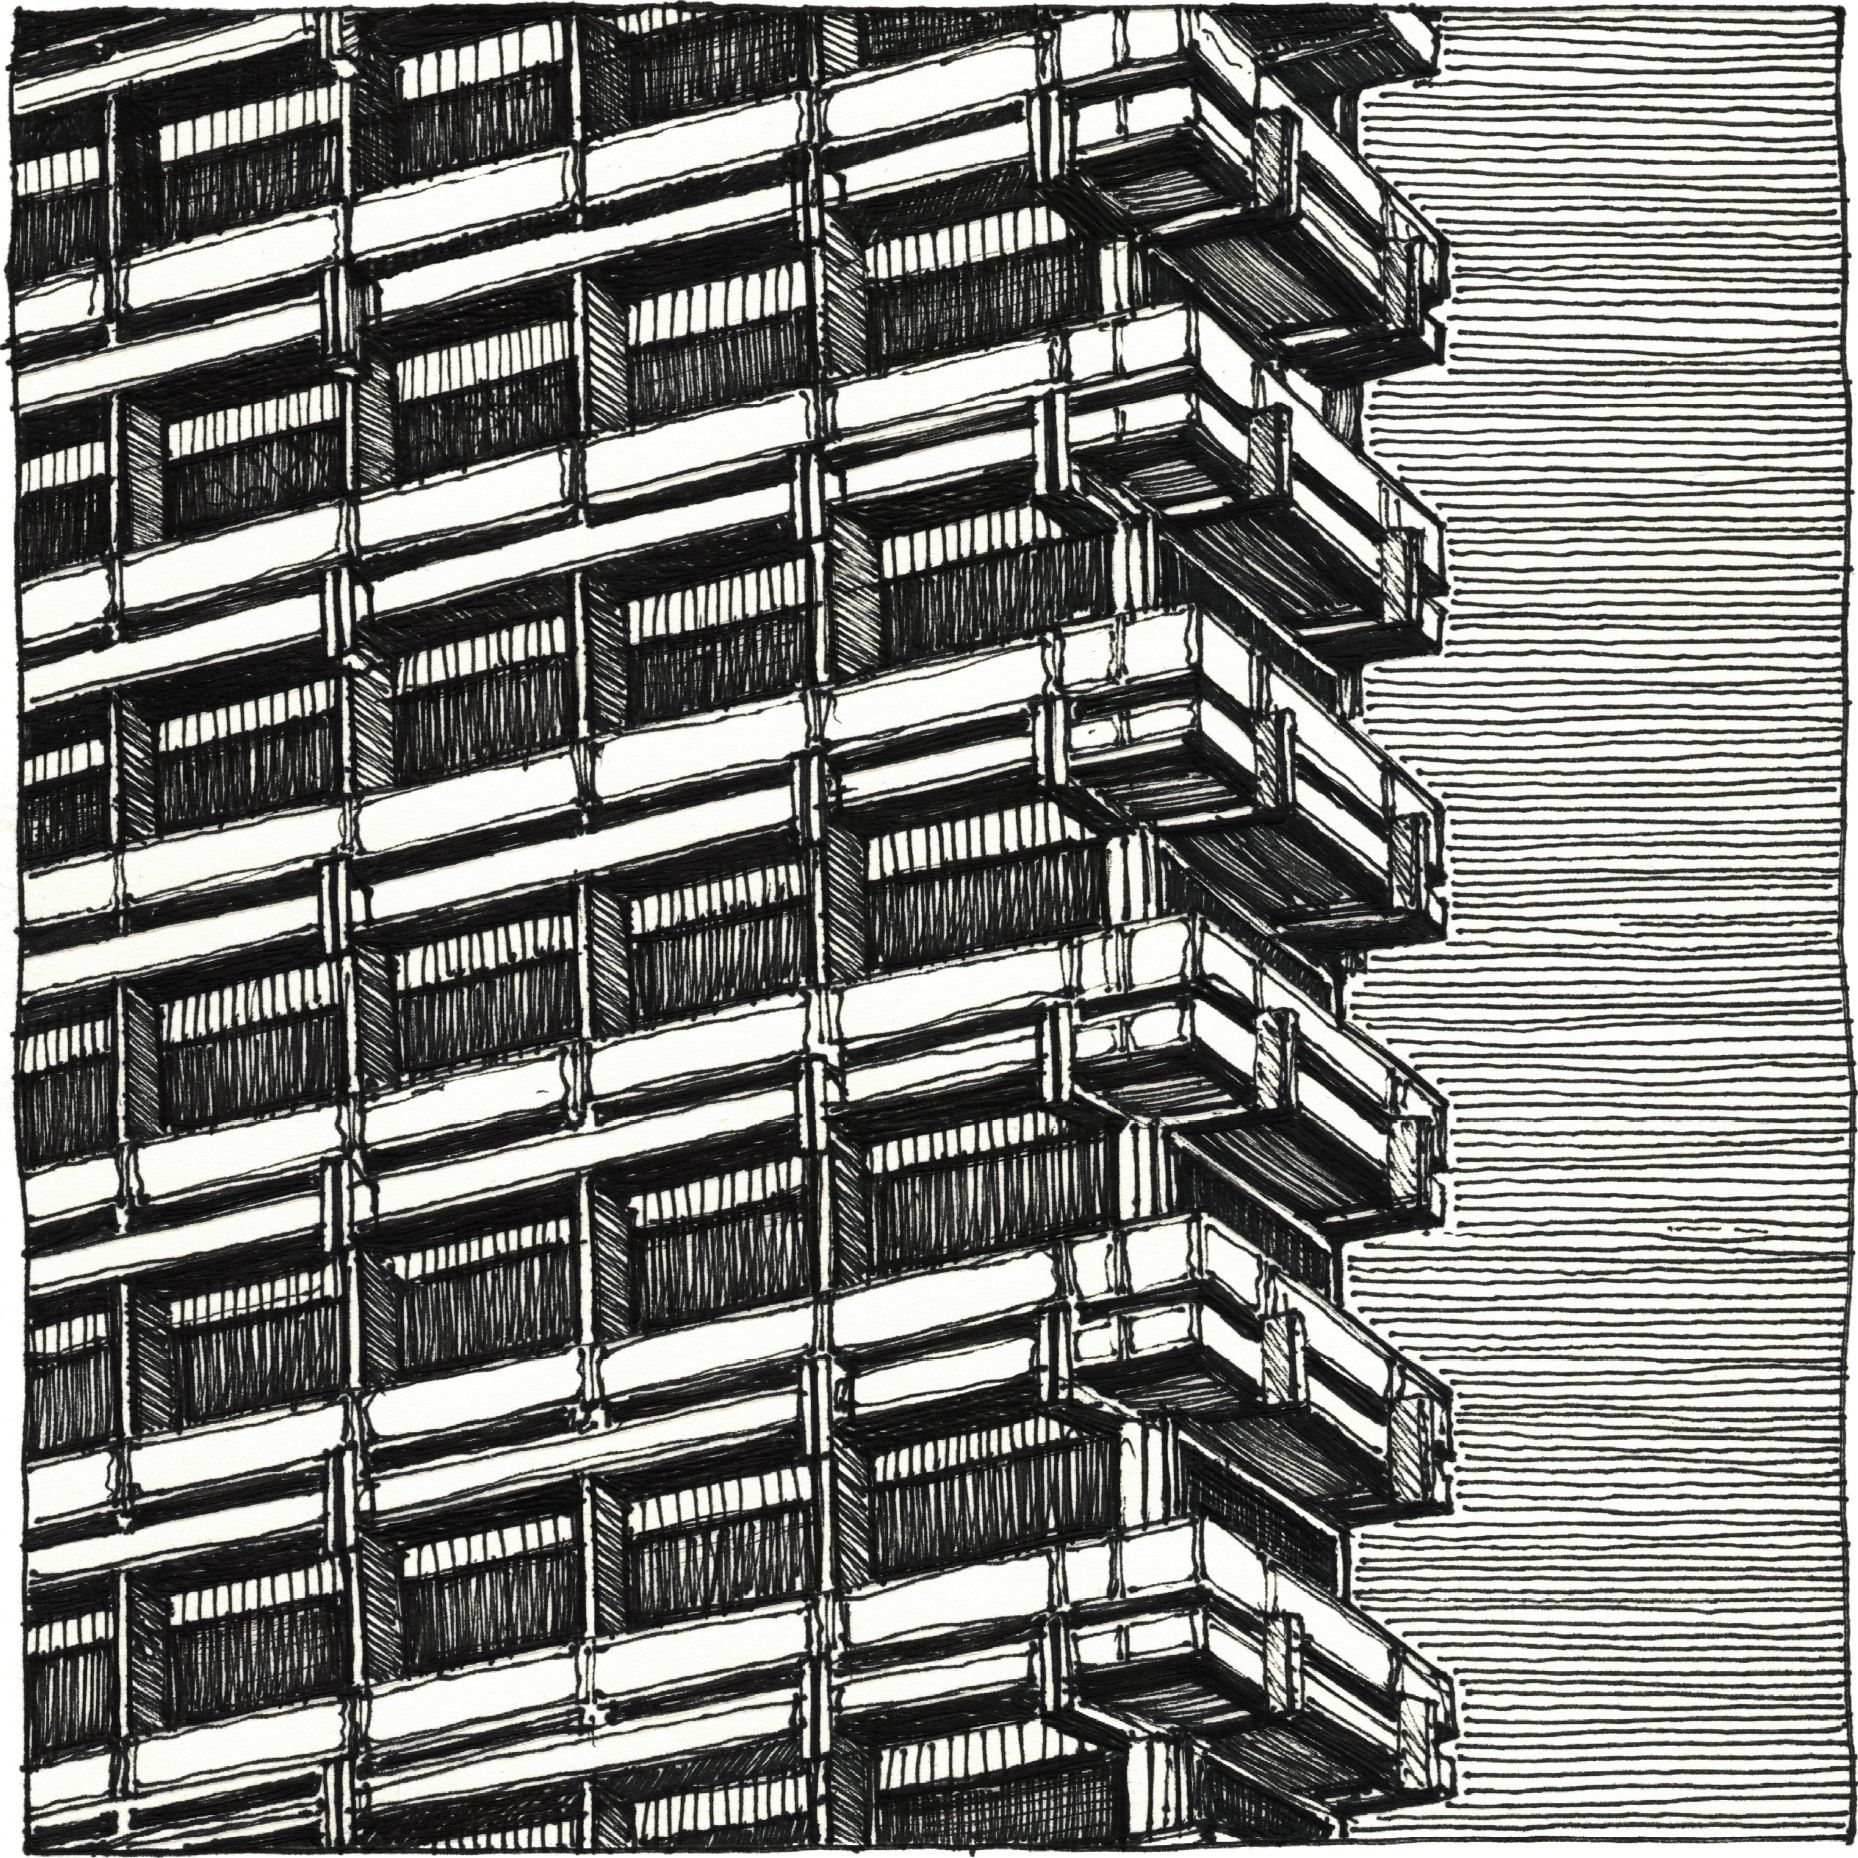 Hotel Intourist - Icons of Socialist Modernism - Drawing by Camillo Visini